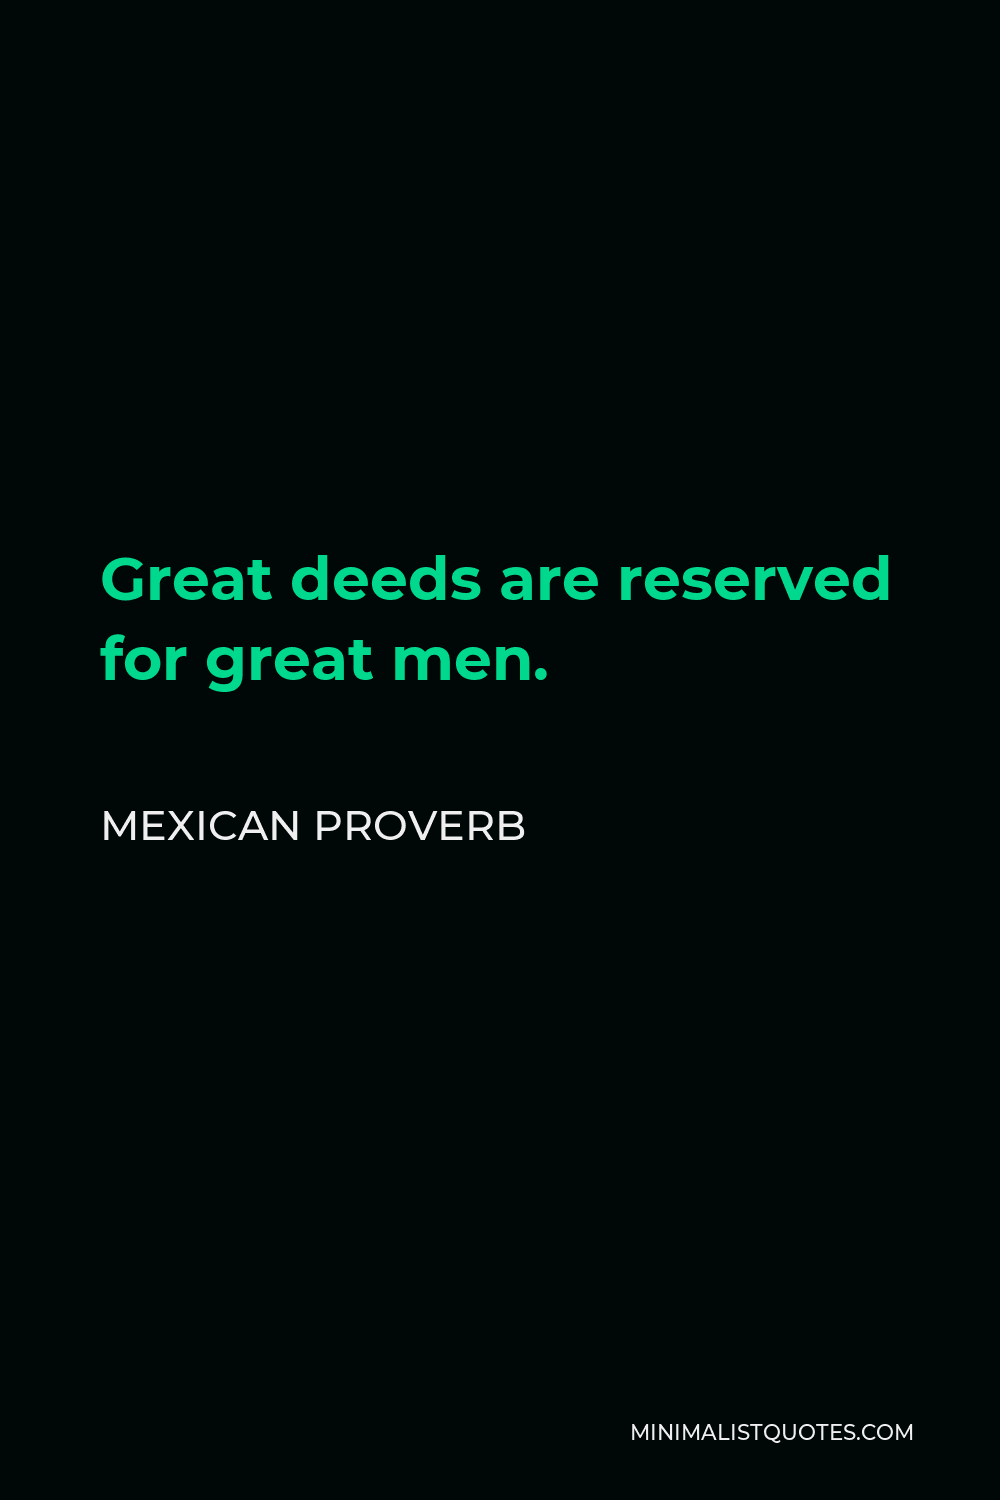 Mexican Proverb Quote - Great deeds are reserved for great men.